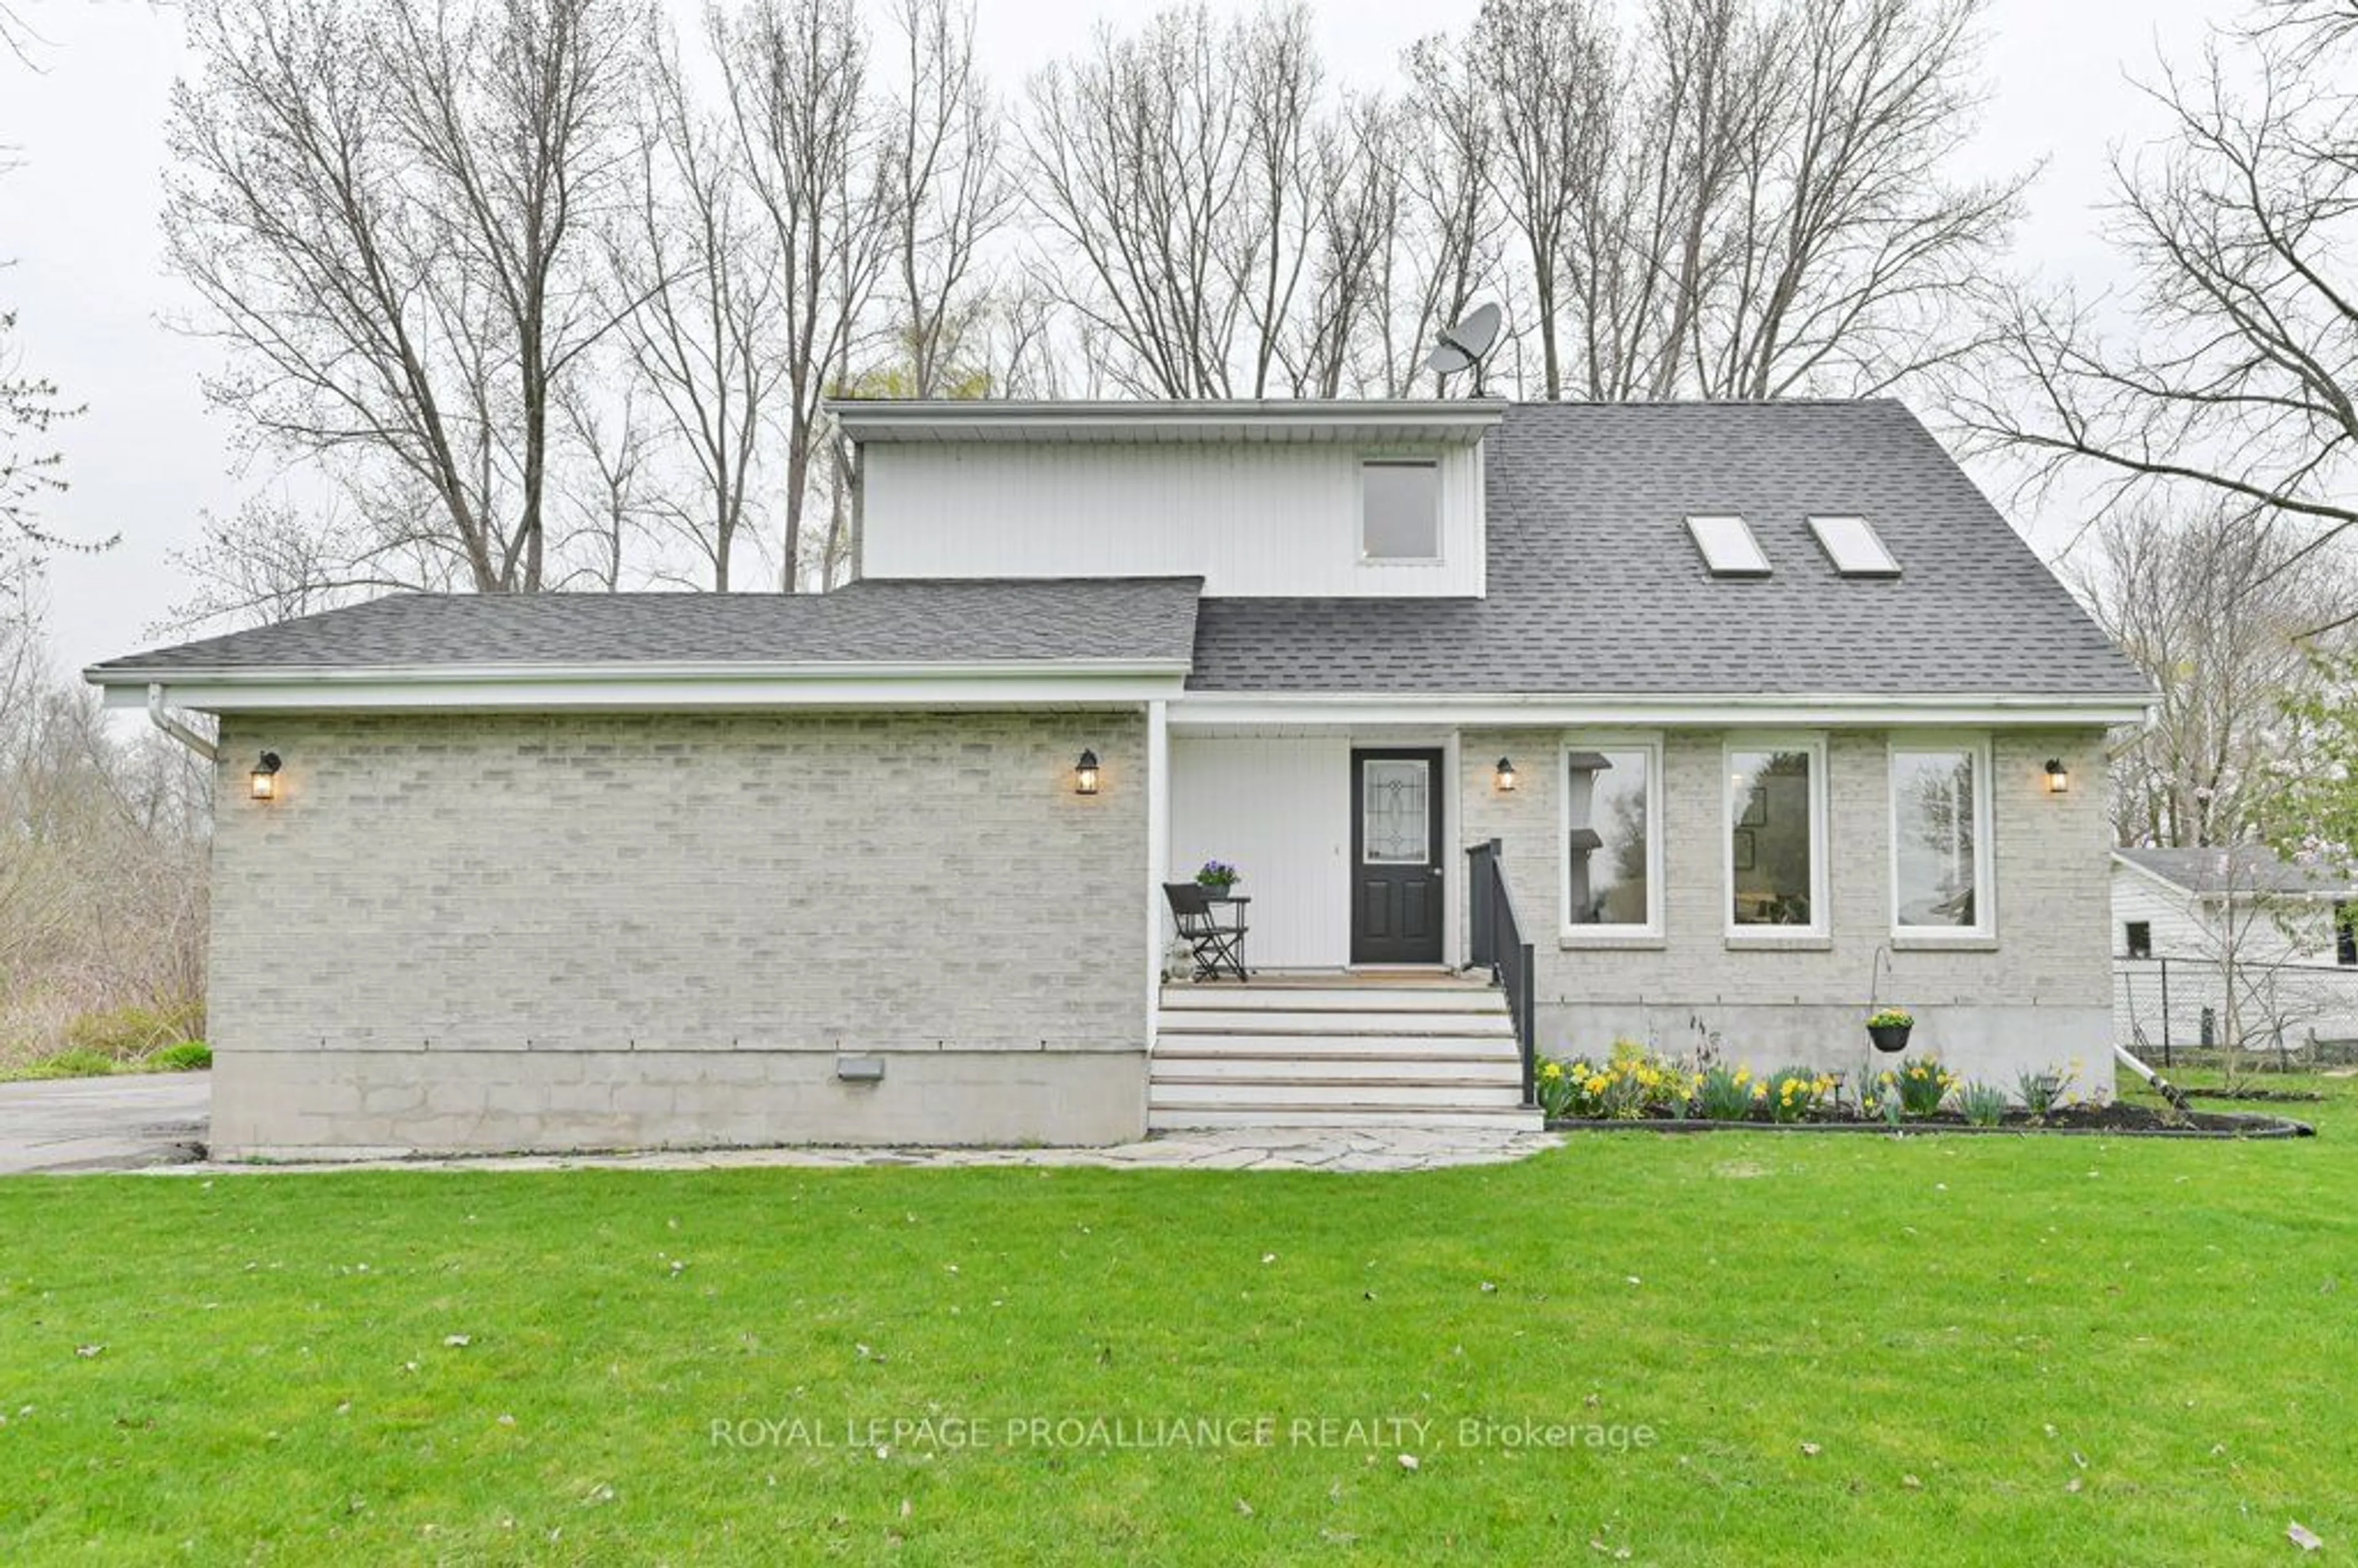 Home with vinyl exterior material for 48 Dorthy Dr, Quinte West Ontario K8V 5P5